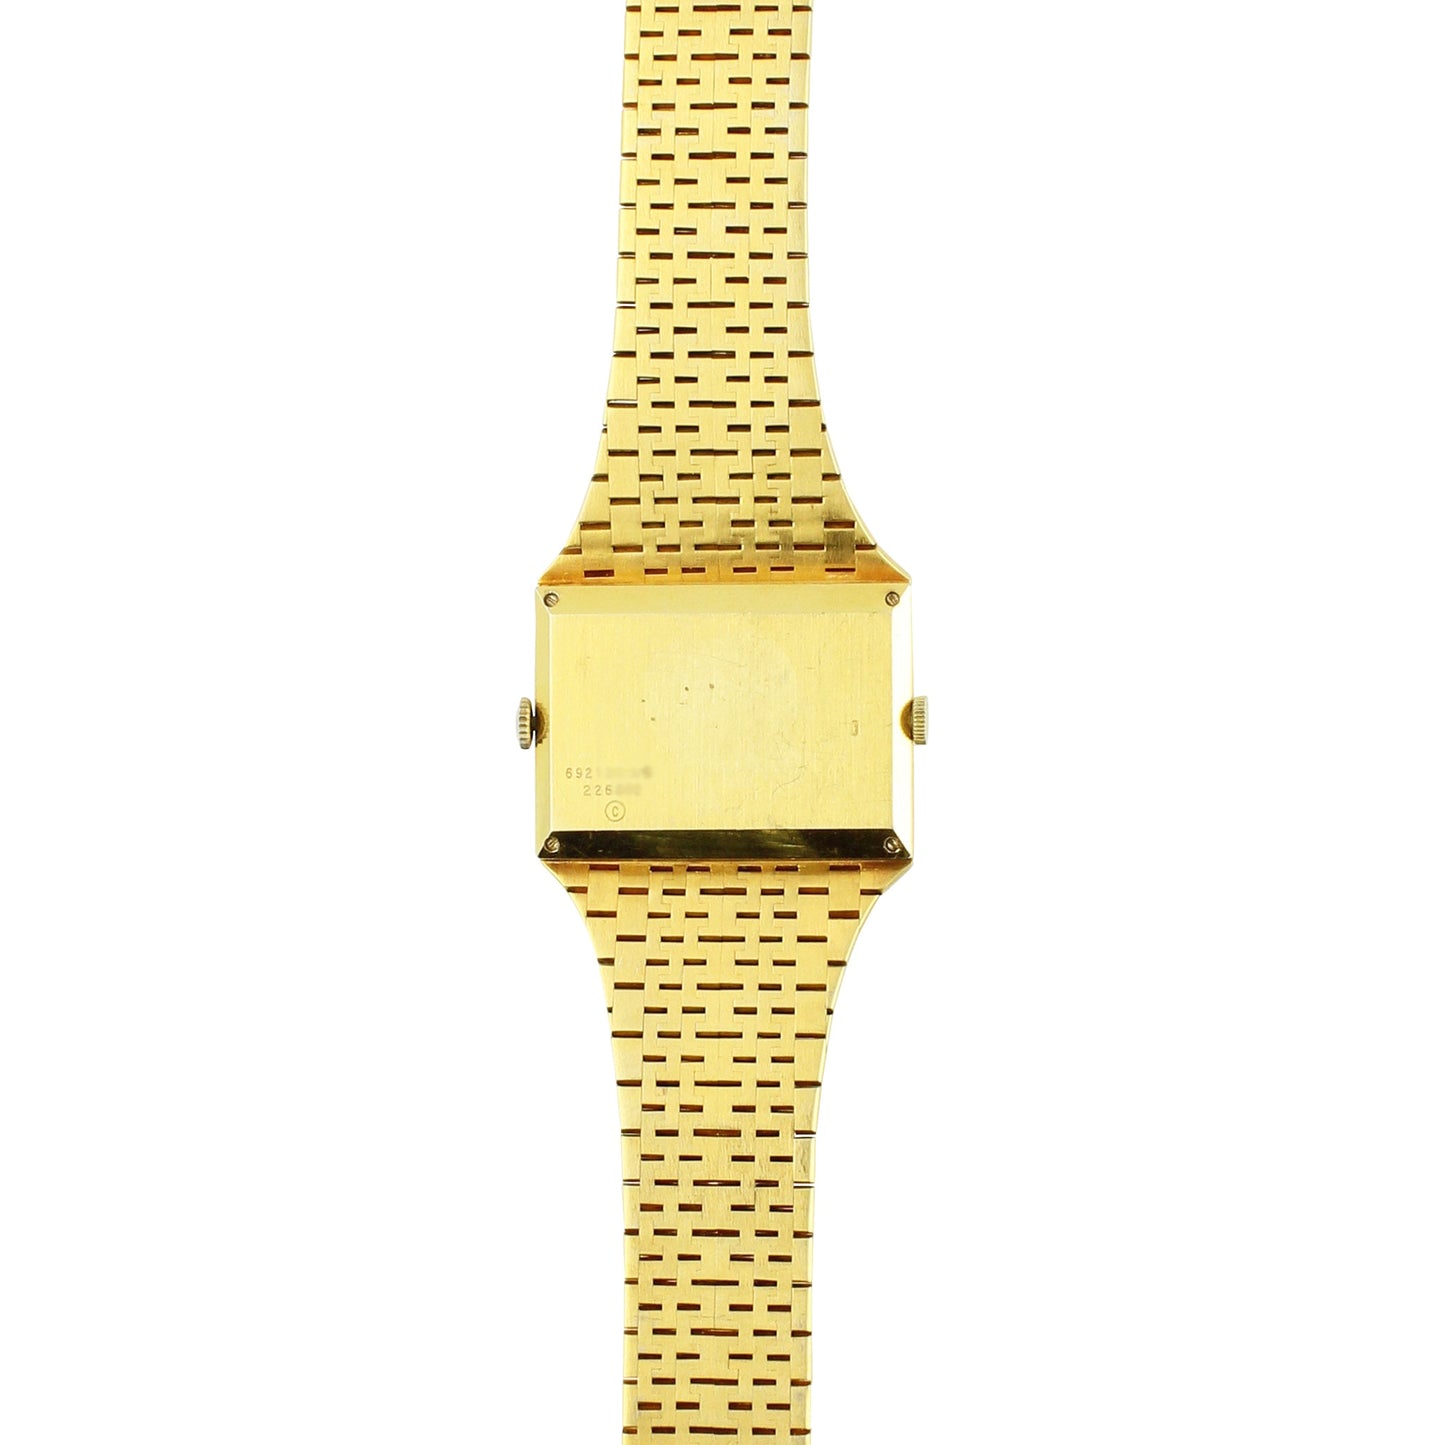 18ct yellow gold Piaget, reference 69210 'Dual time' bracelet watch. Made 1974